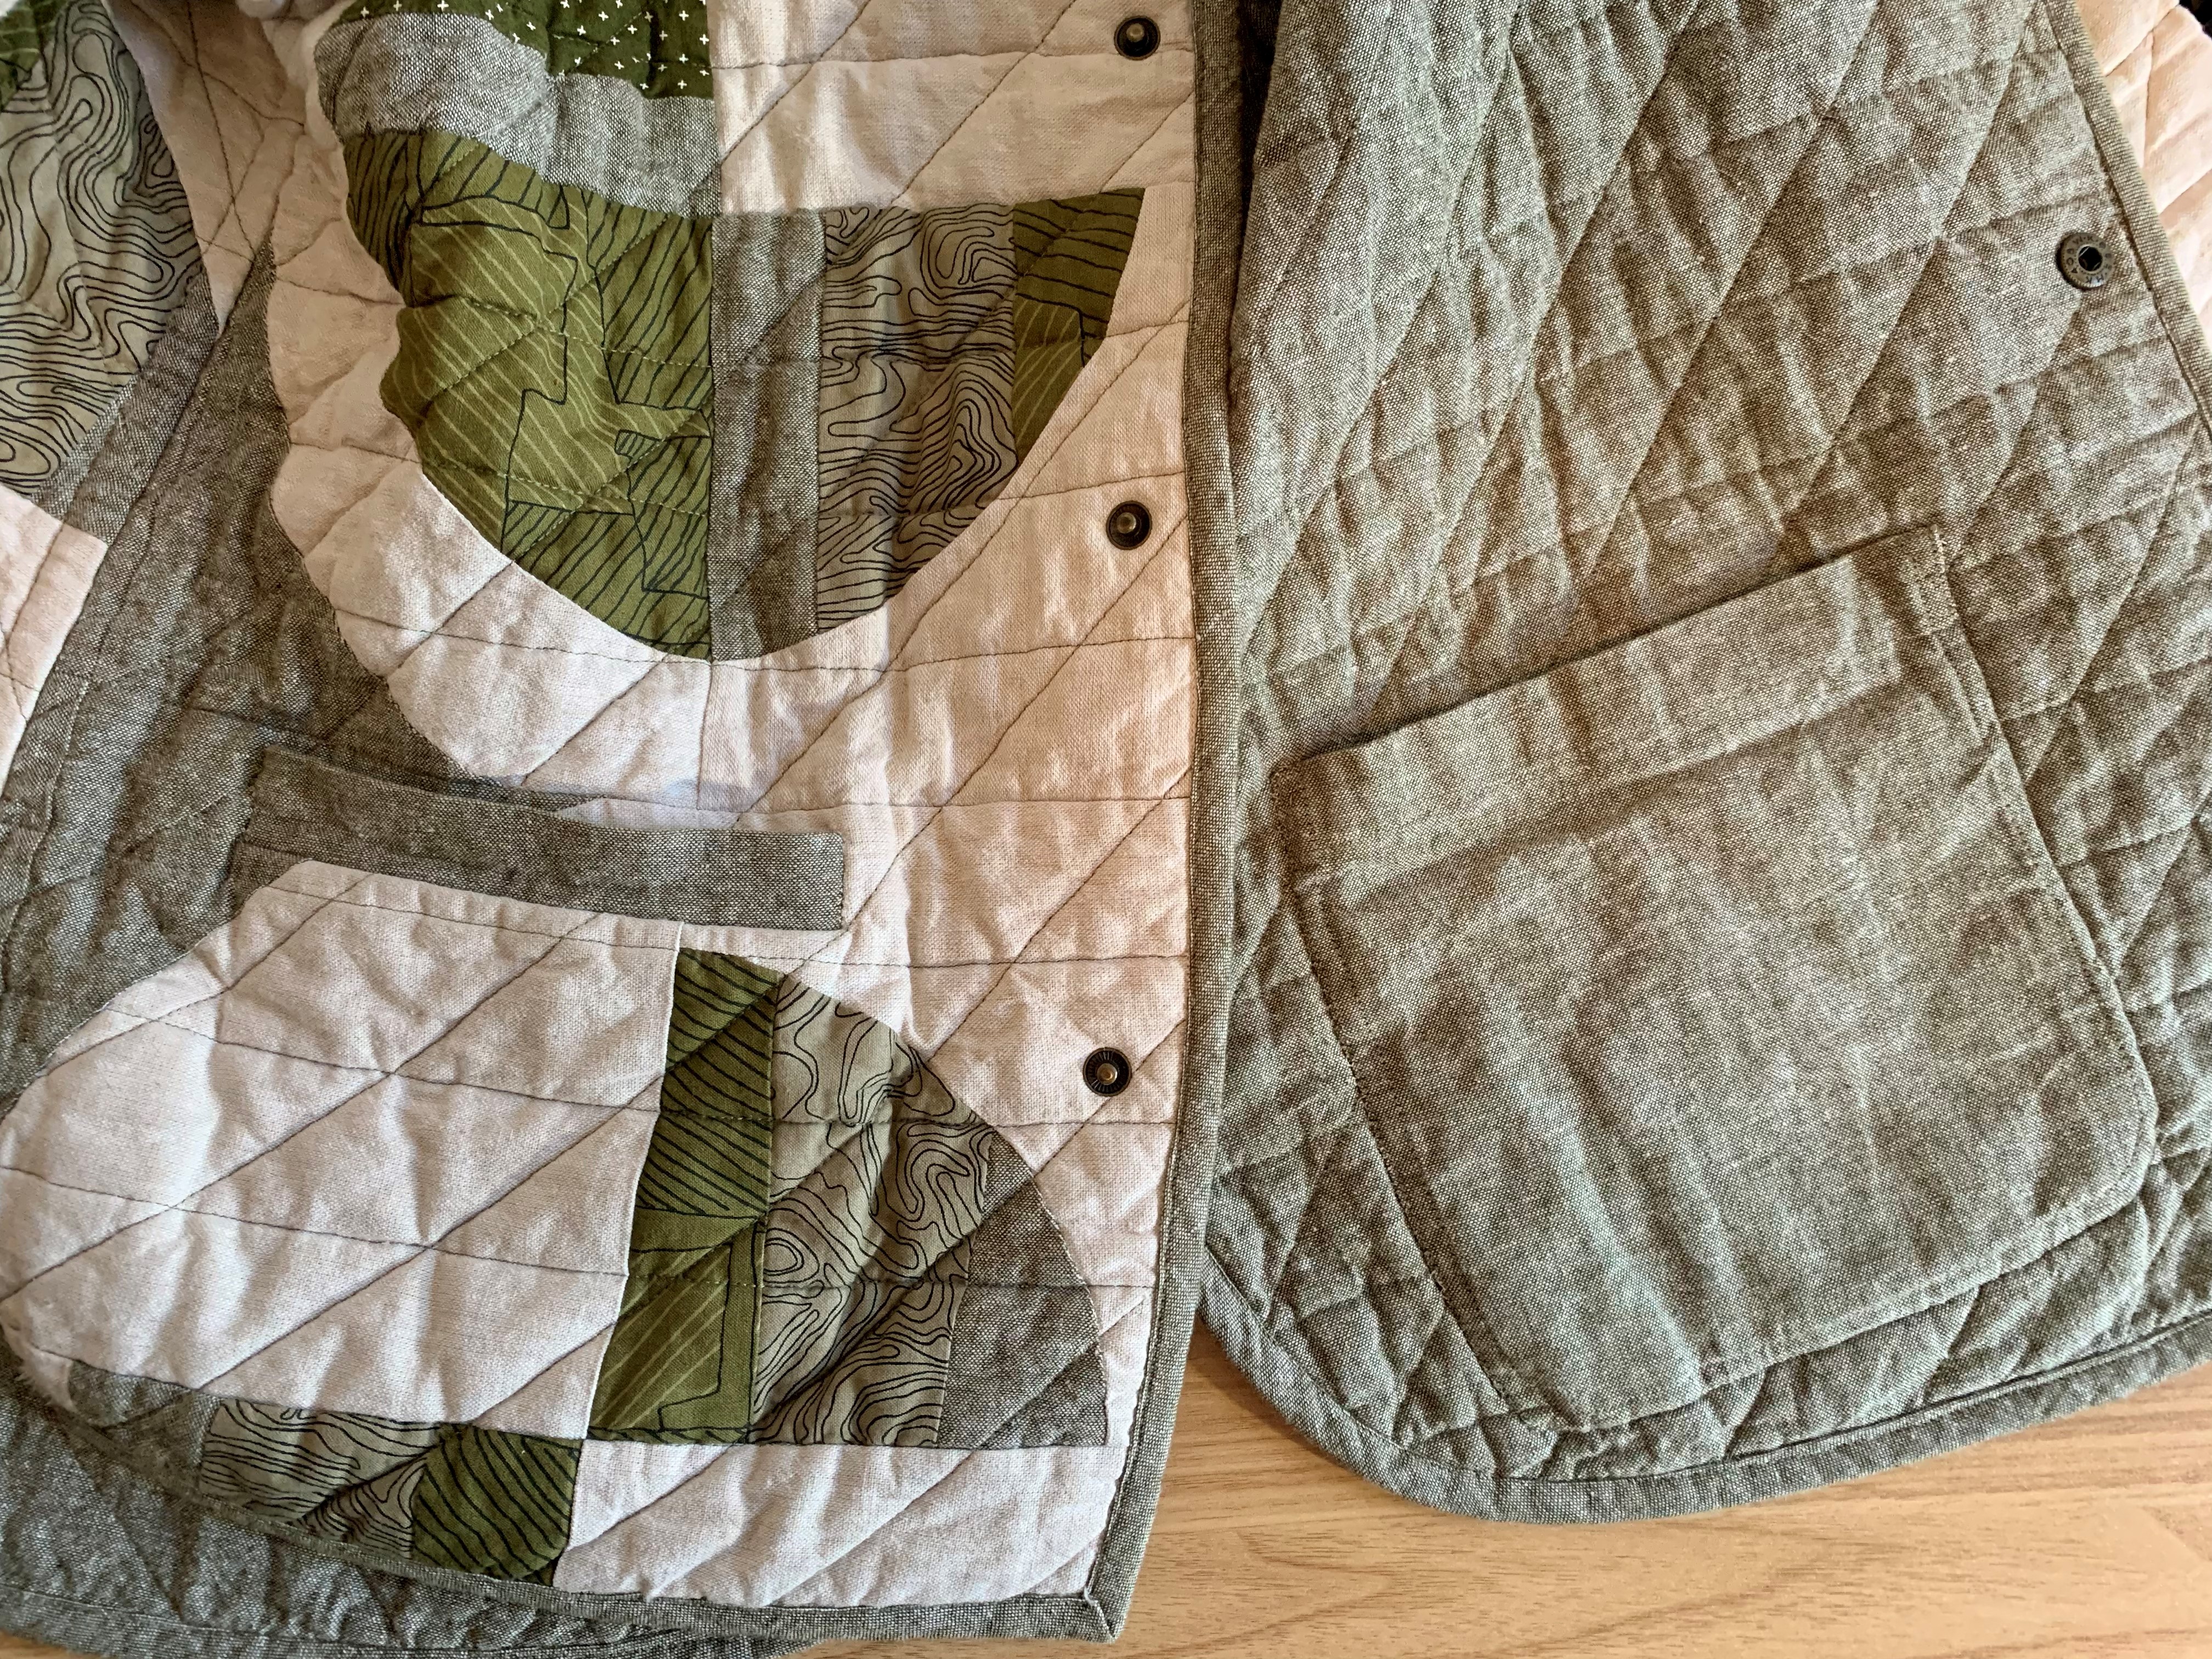 How To Make Your Own Reversible Quilted Fabric